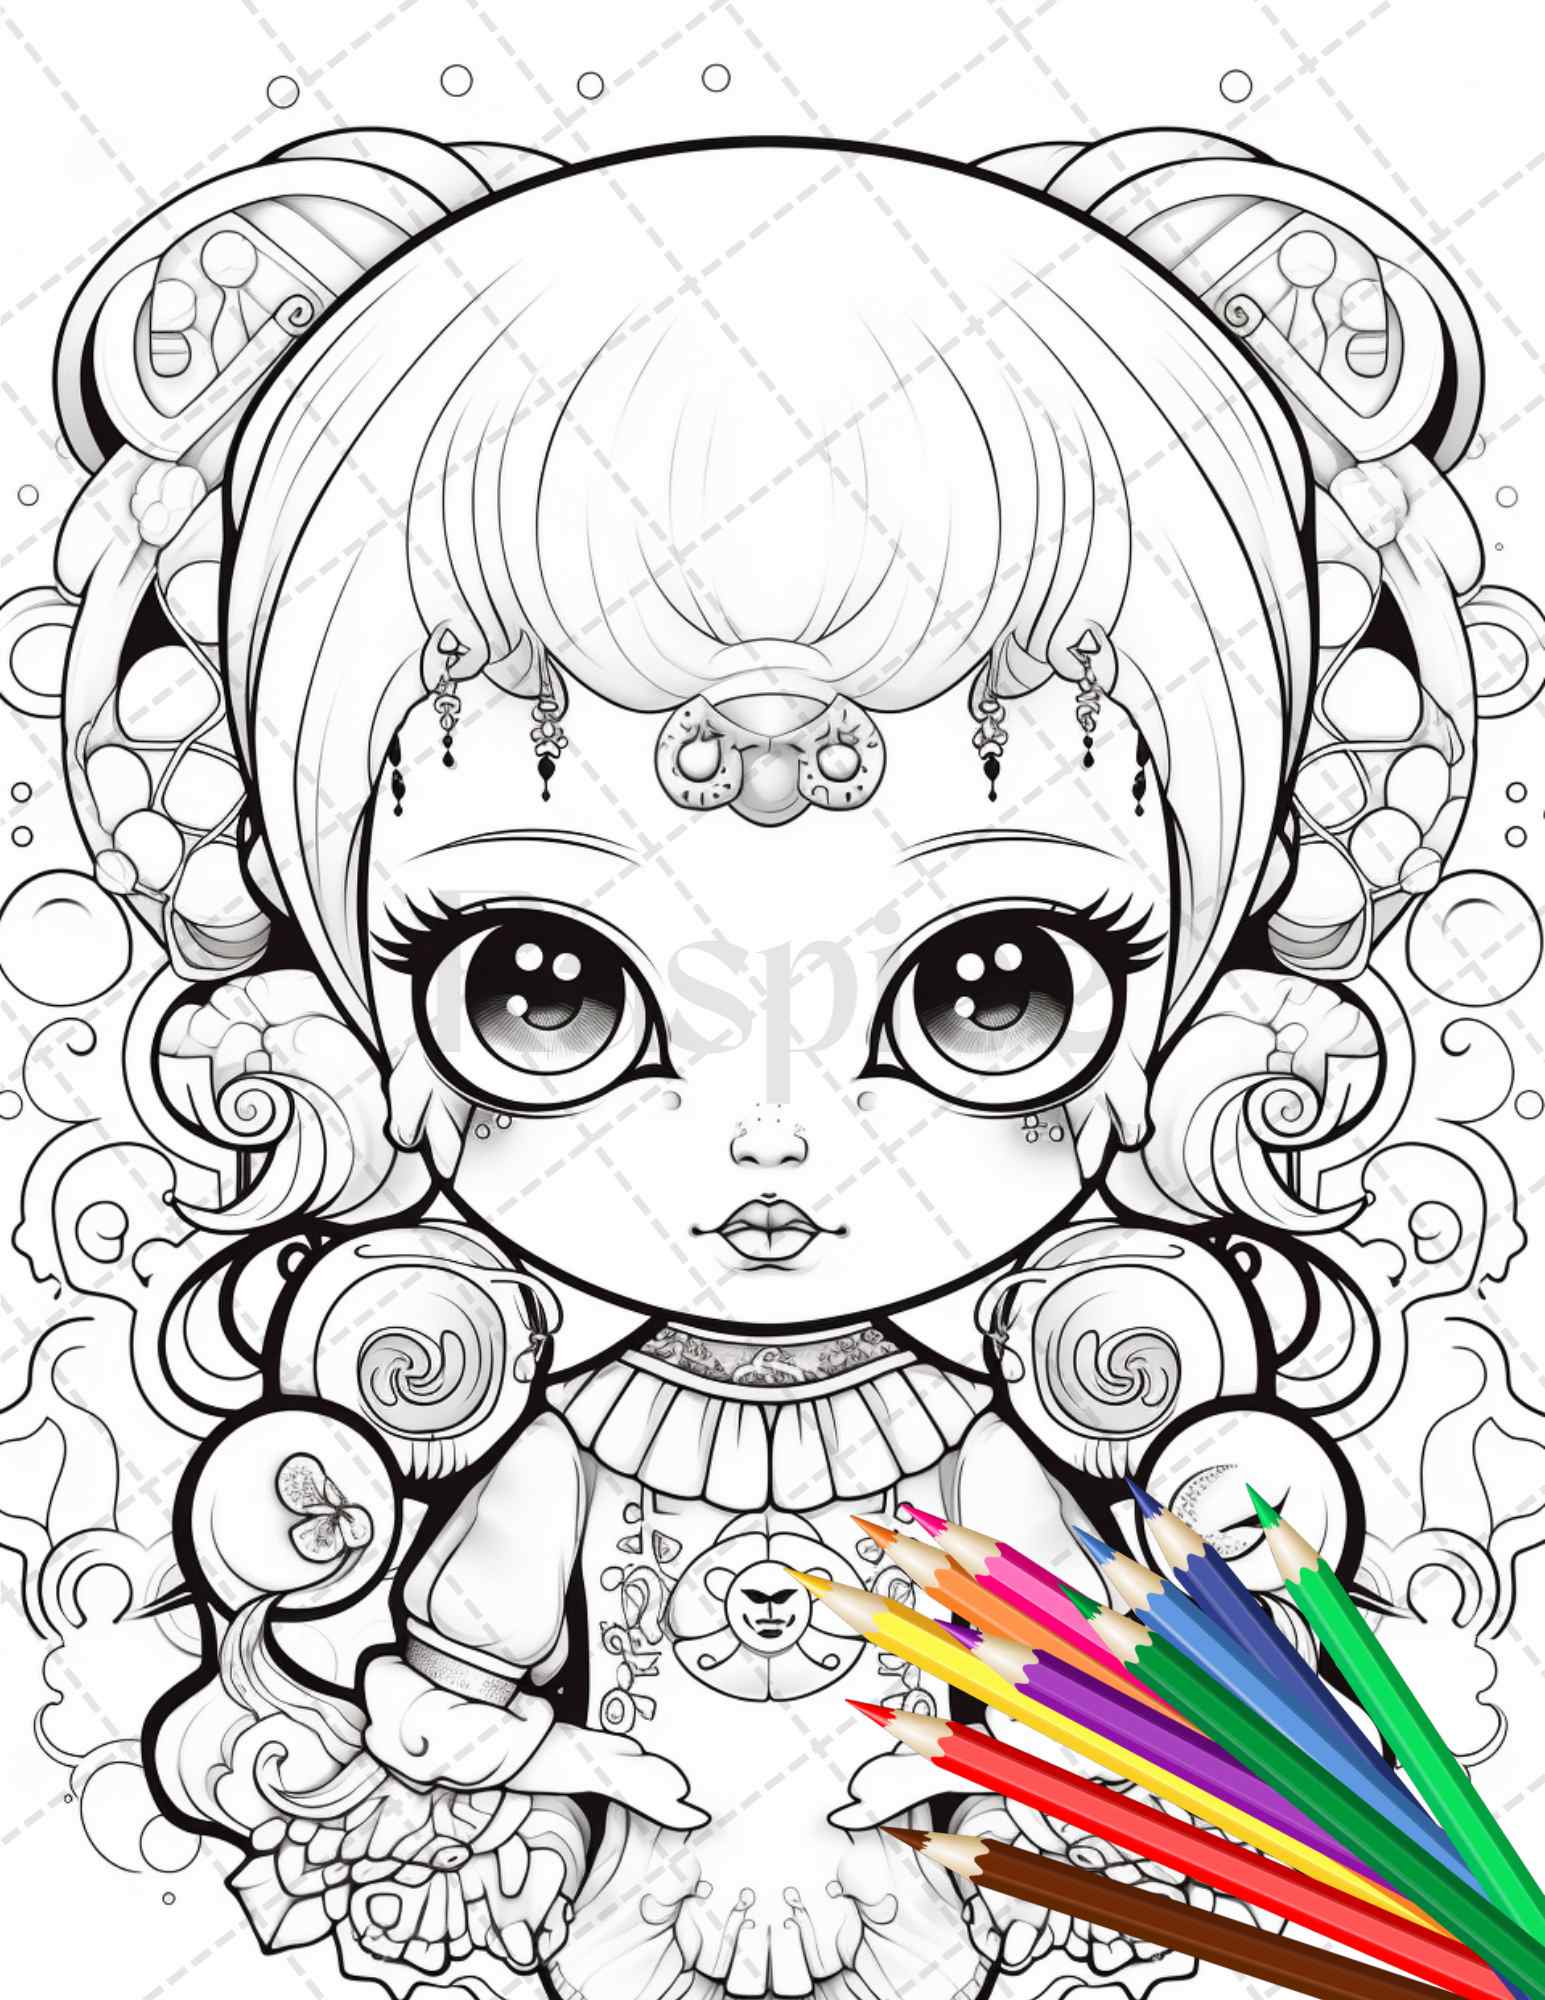 Creepy Kawaii CHIBI Horror Beauty Pastel Goth Adult Reverse Coloring Book  With Black Pages for Depression